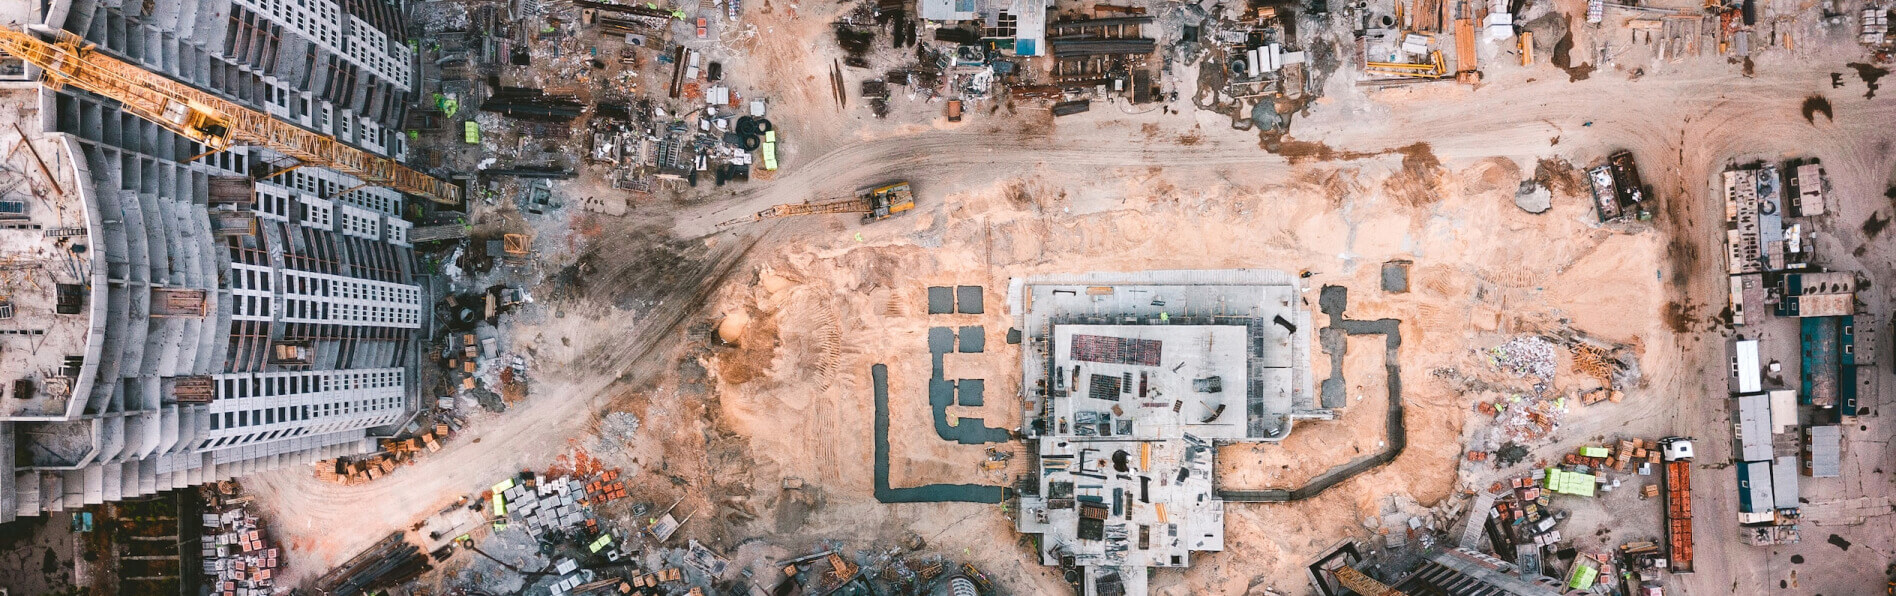 Aerial image of a construction